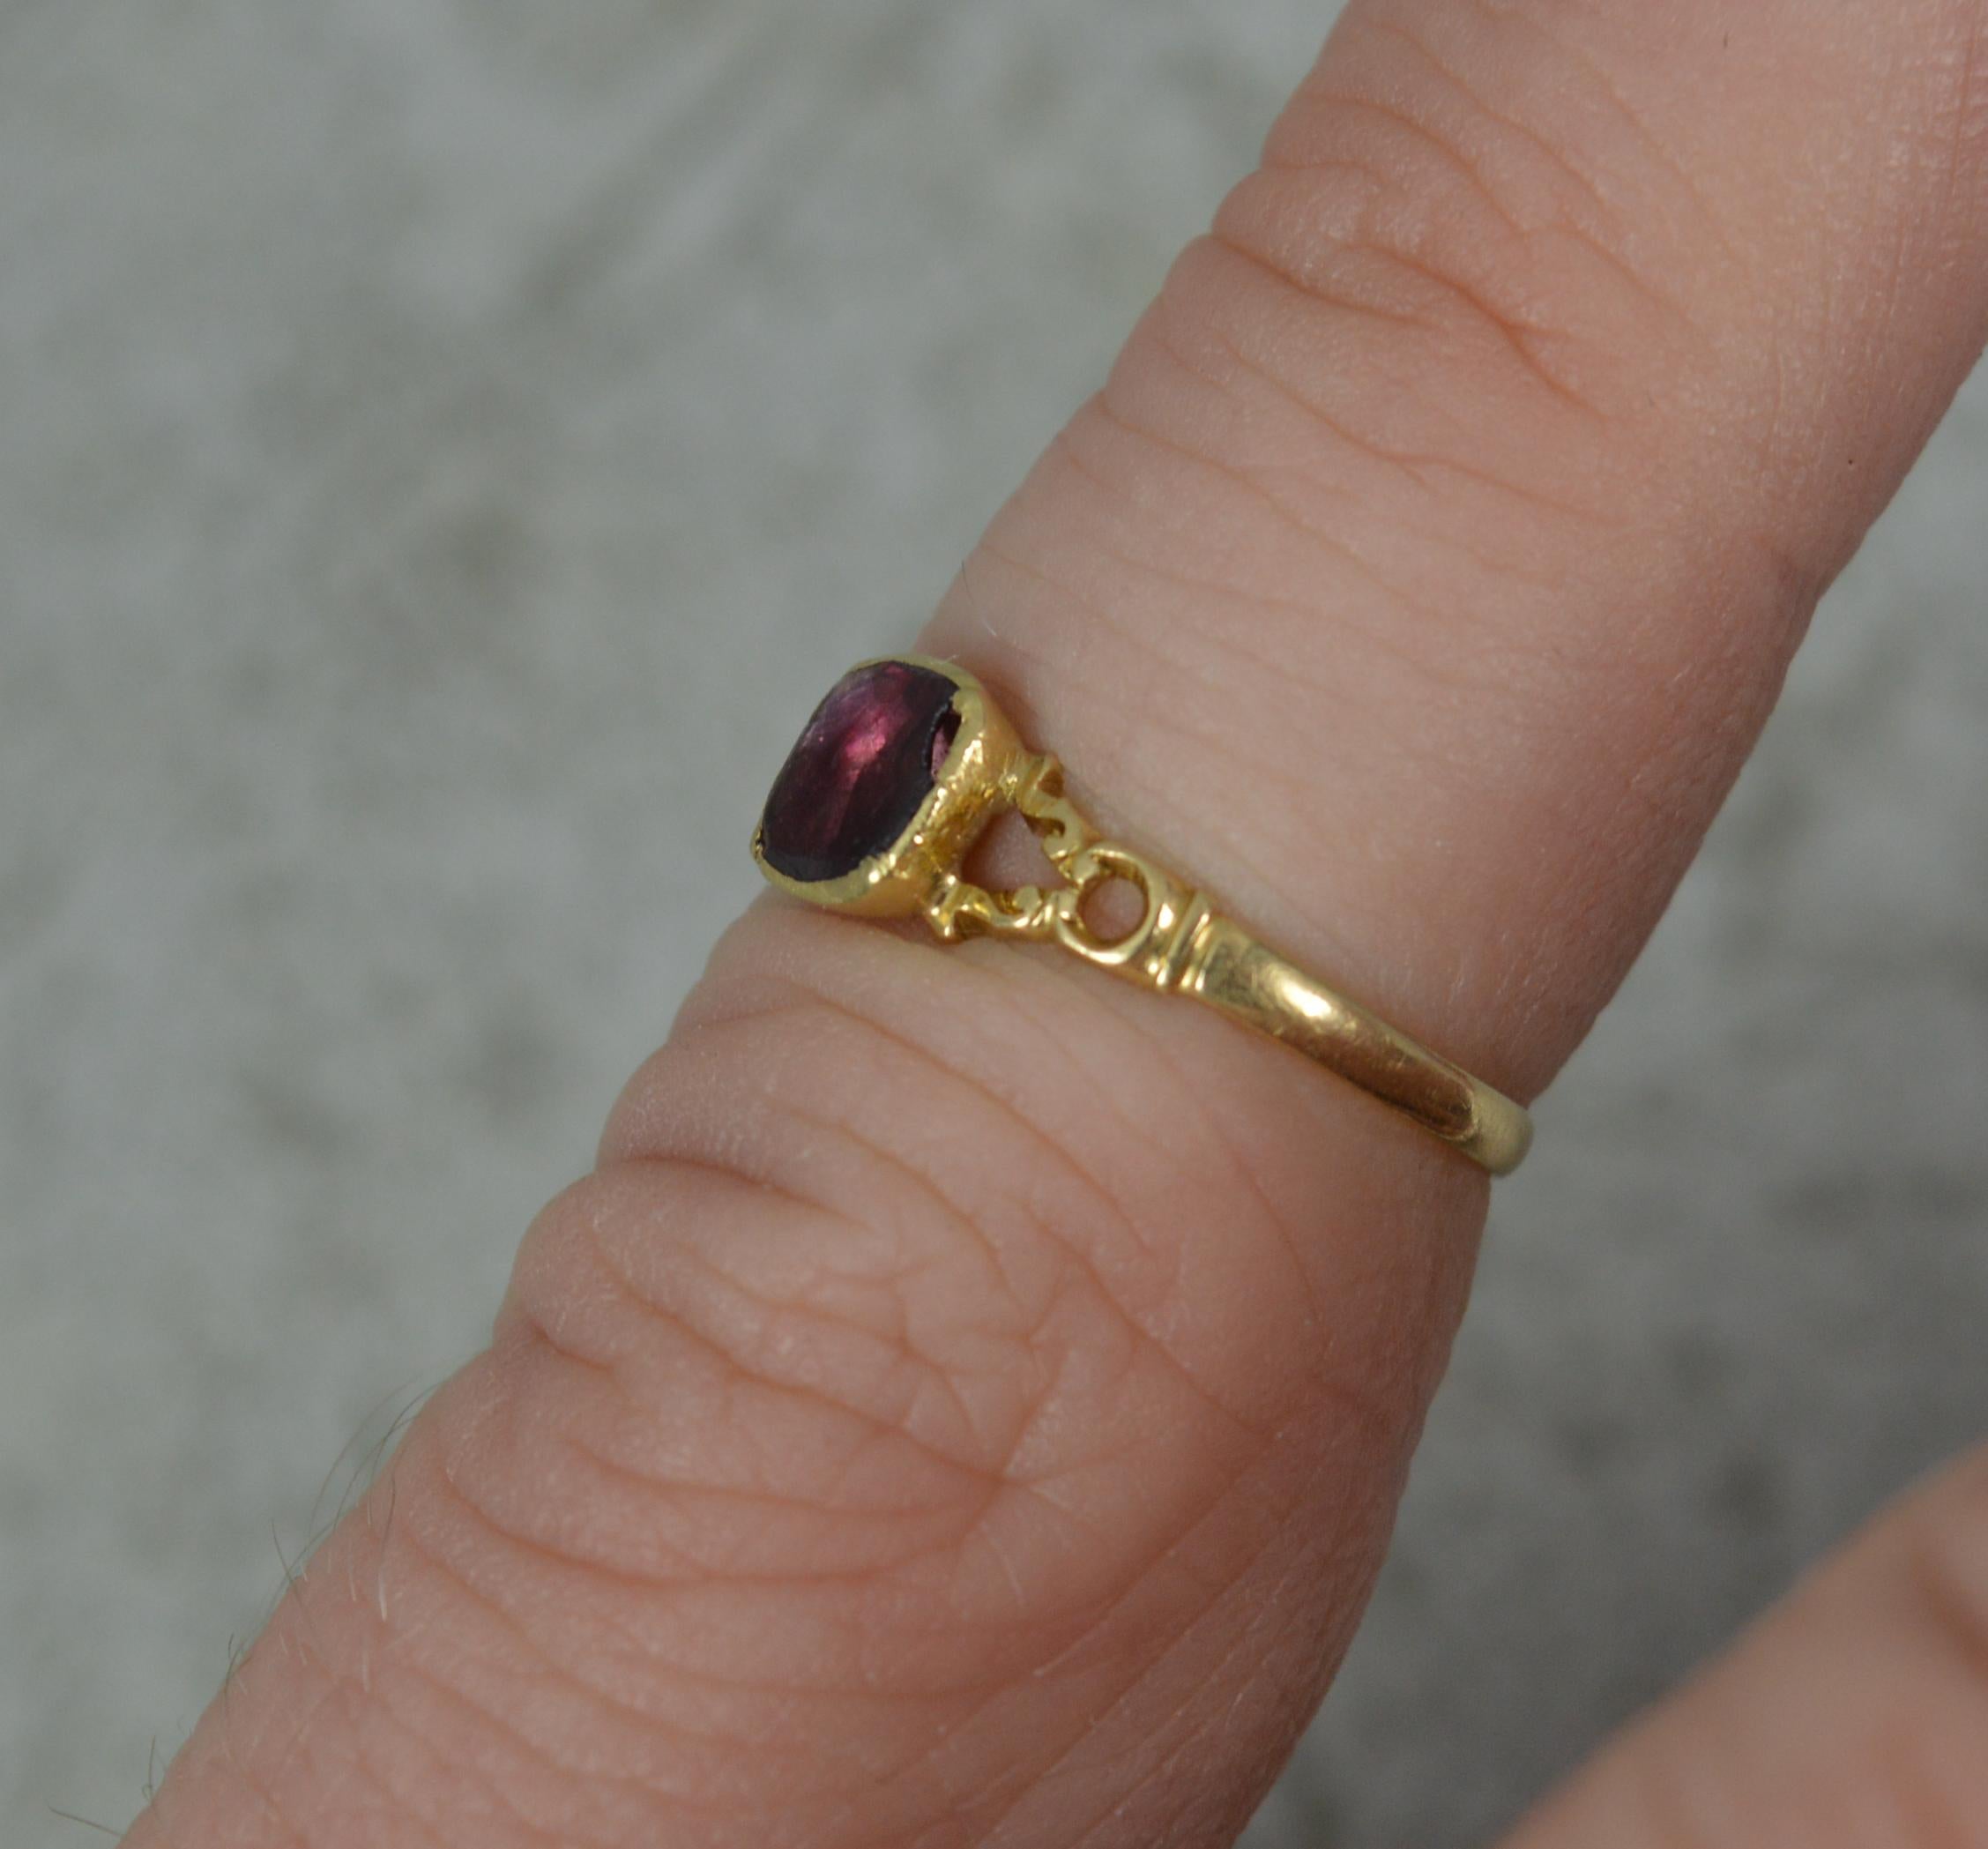 Square Cut Rare Georgian Childrens Foiled Garnet Solitaire and 18ct Gold Ring, c1790